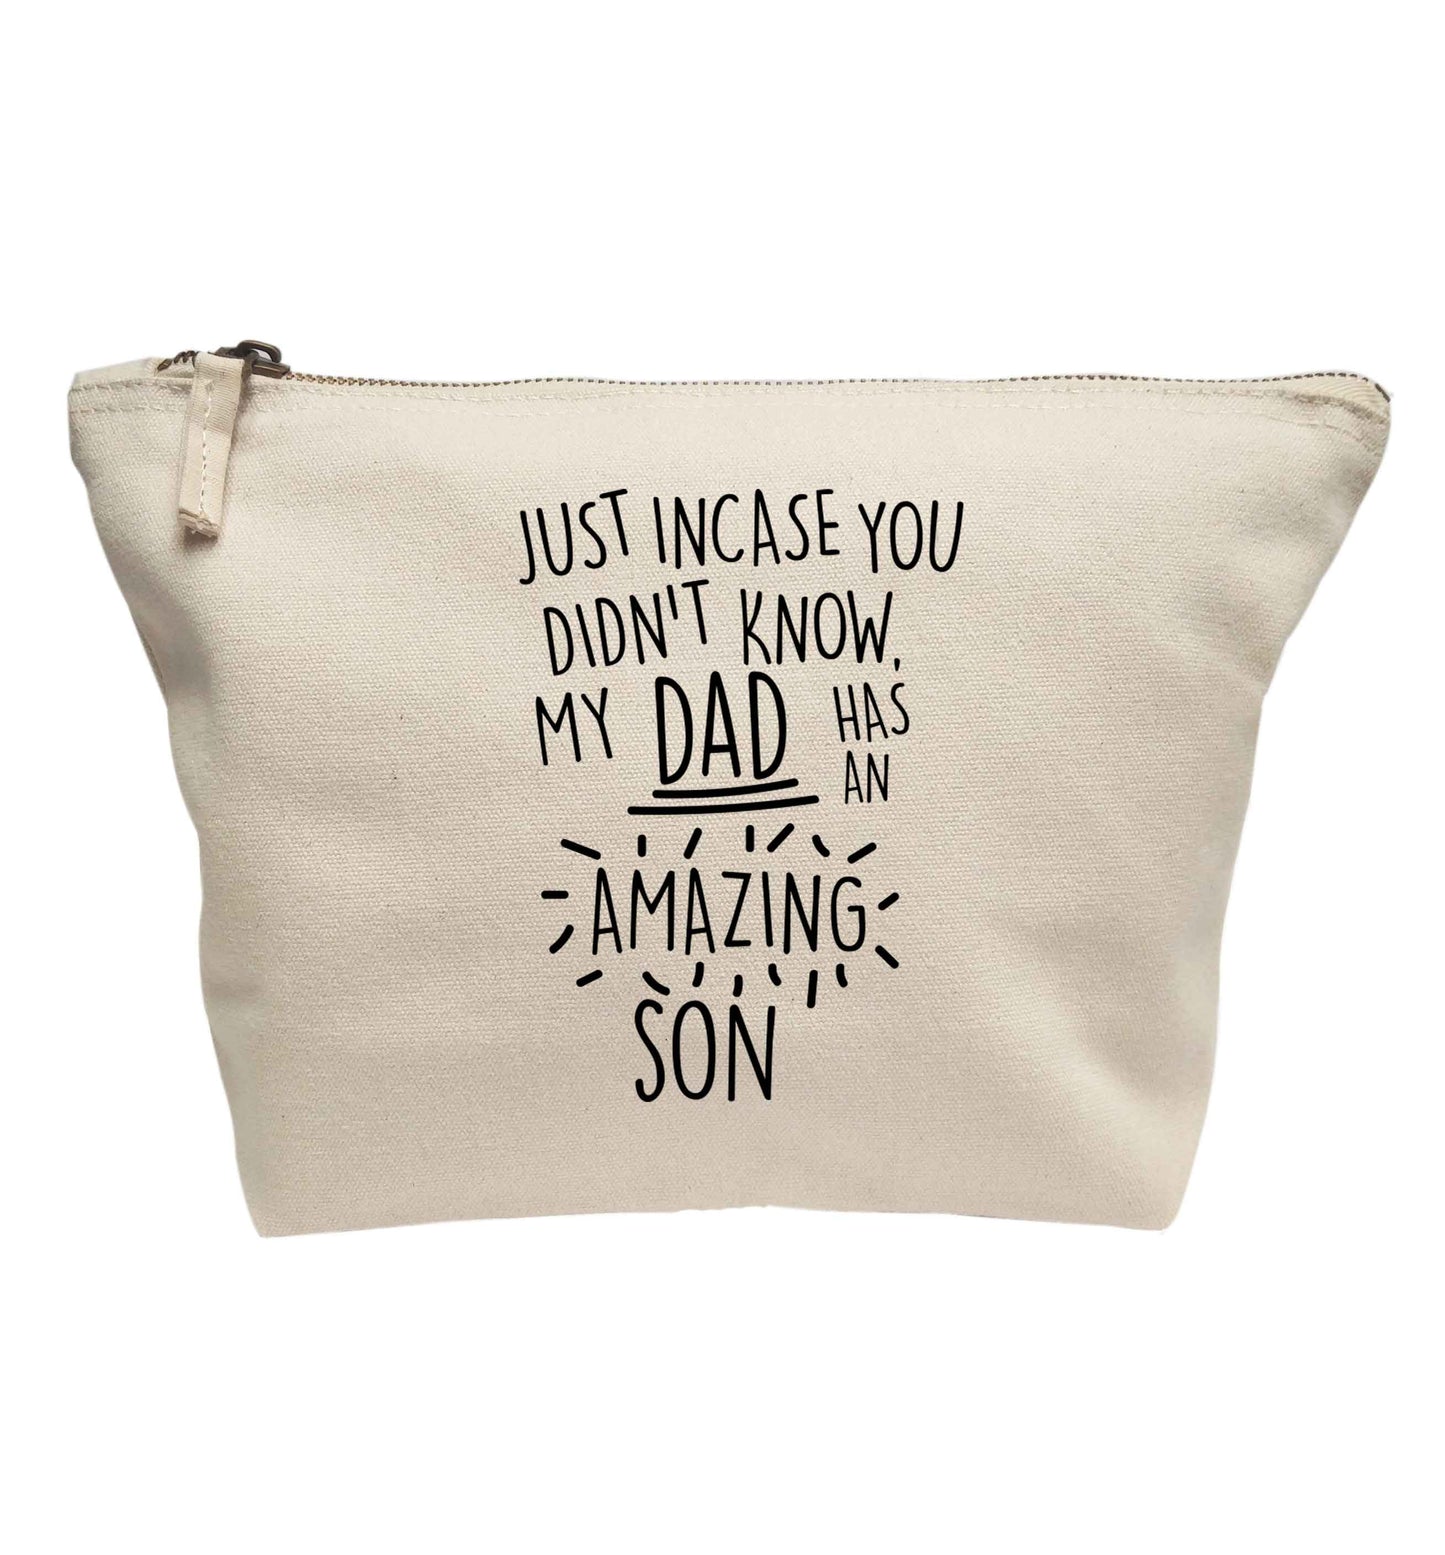 Just incase you didn't know my dad has an amazing son | Makeup / wash bag